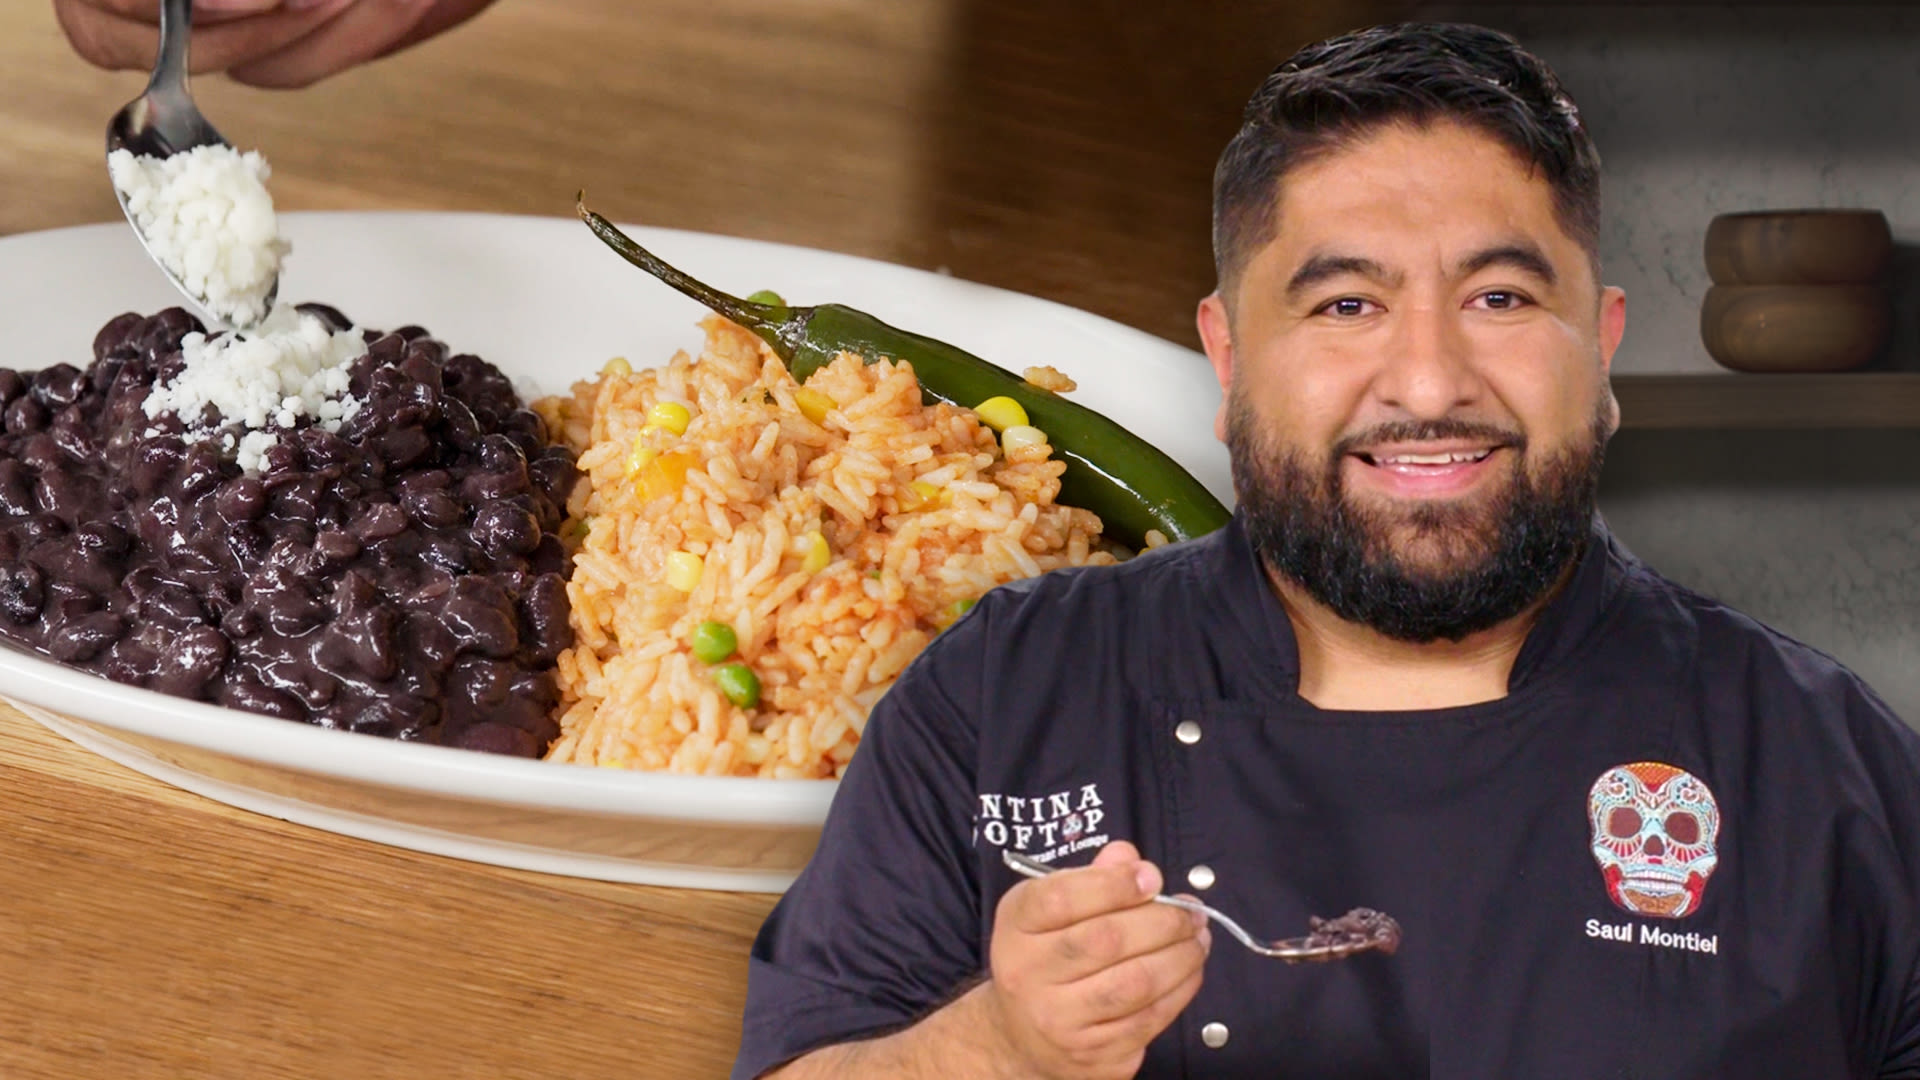 The Best Mexican Rice and Beans You’ll Ever Make